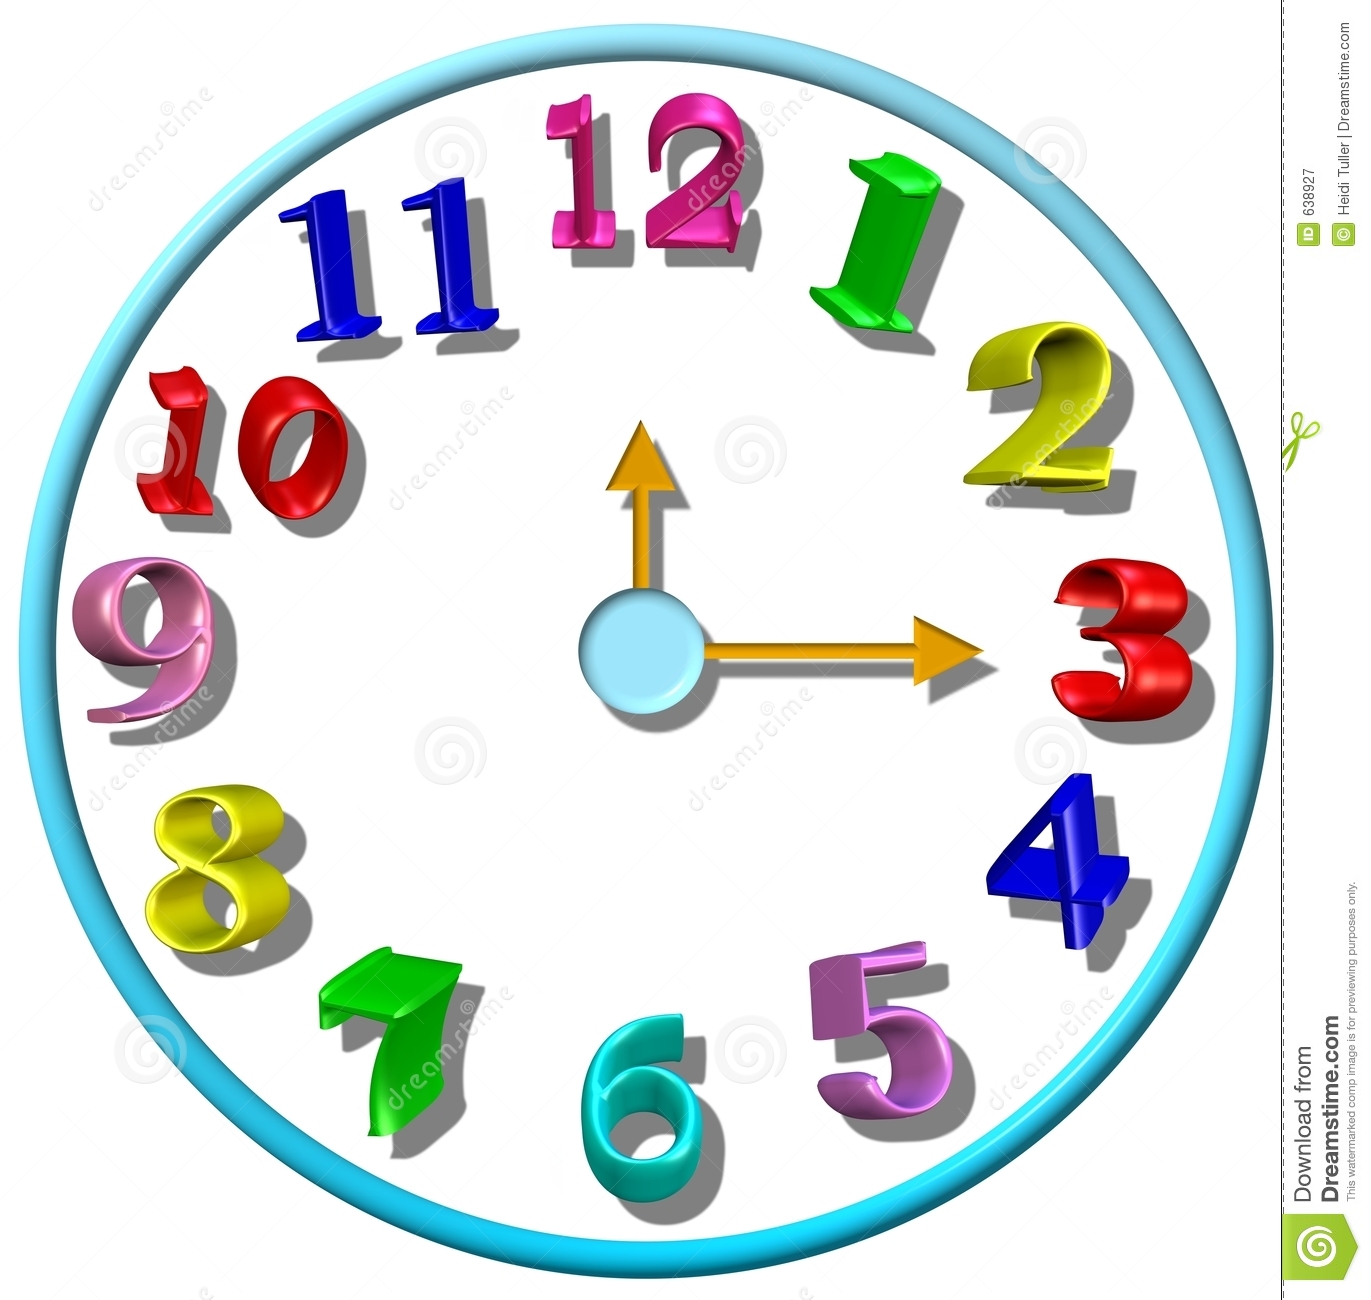 animated clock clip art free download - photo #38